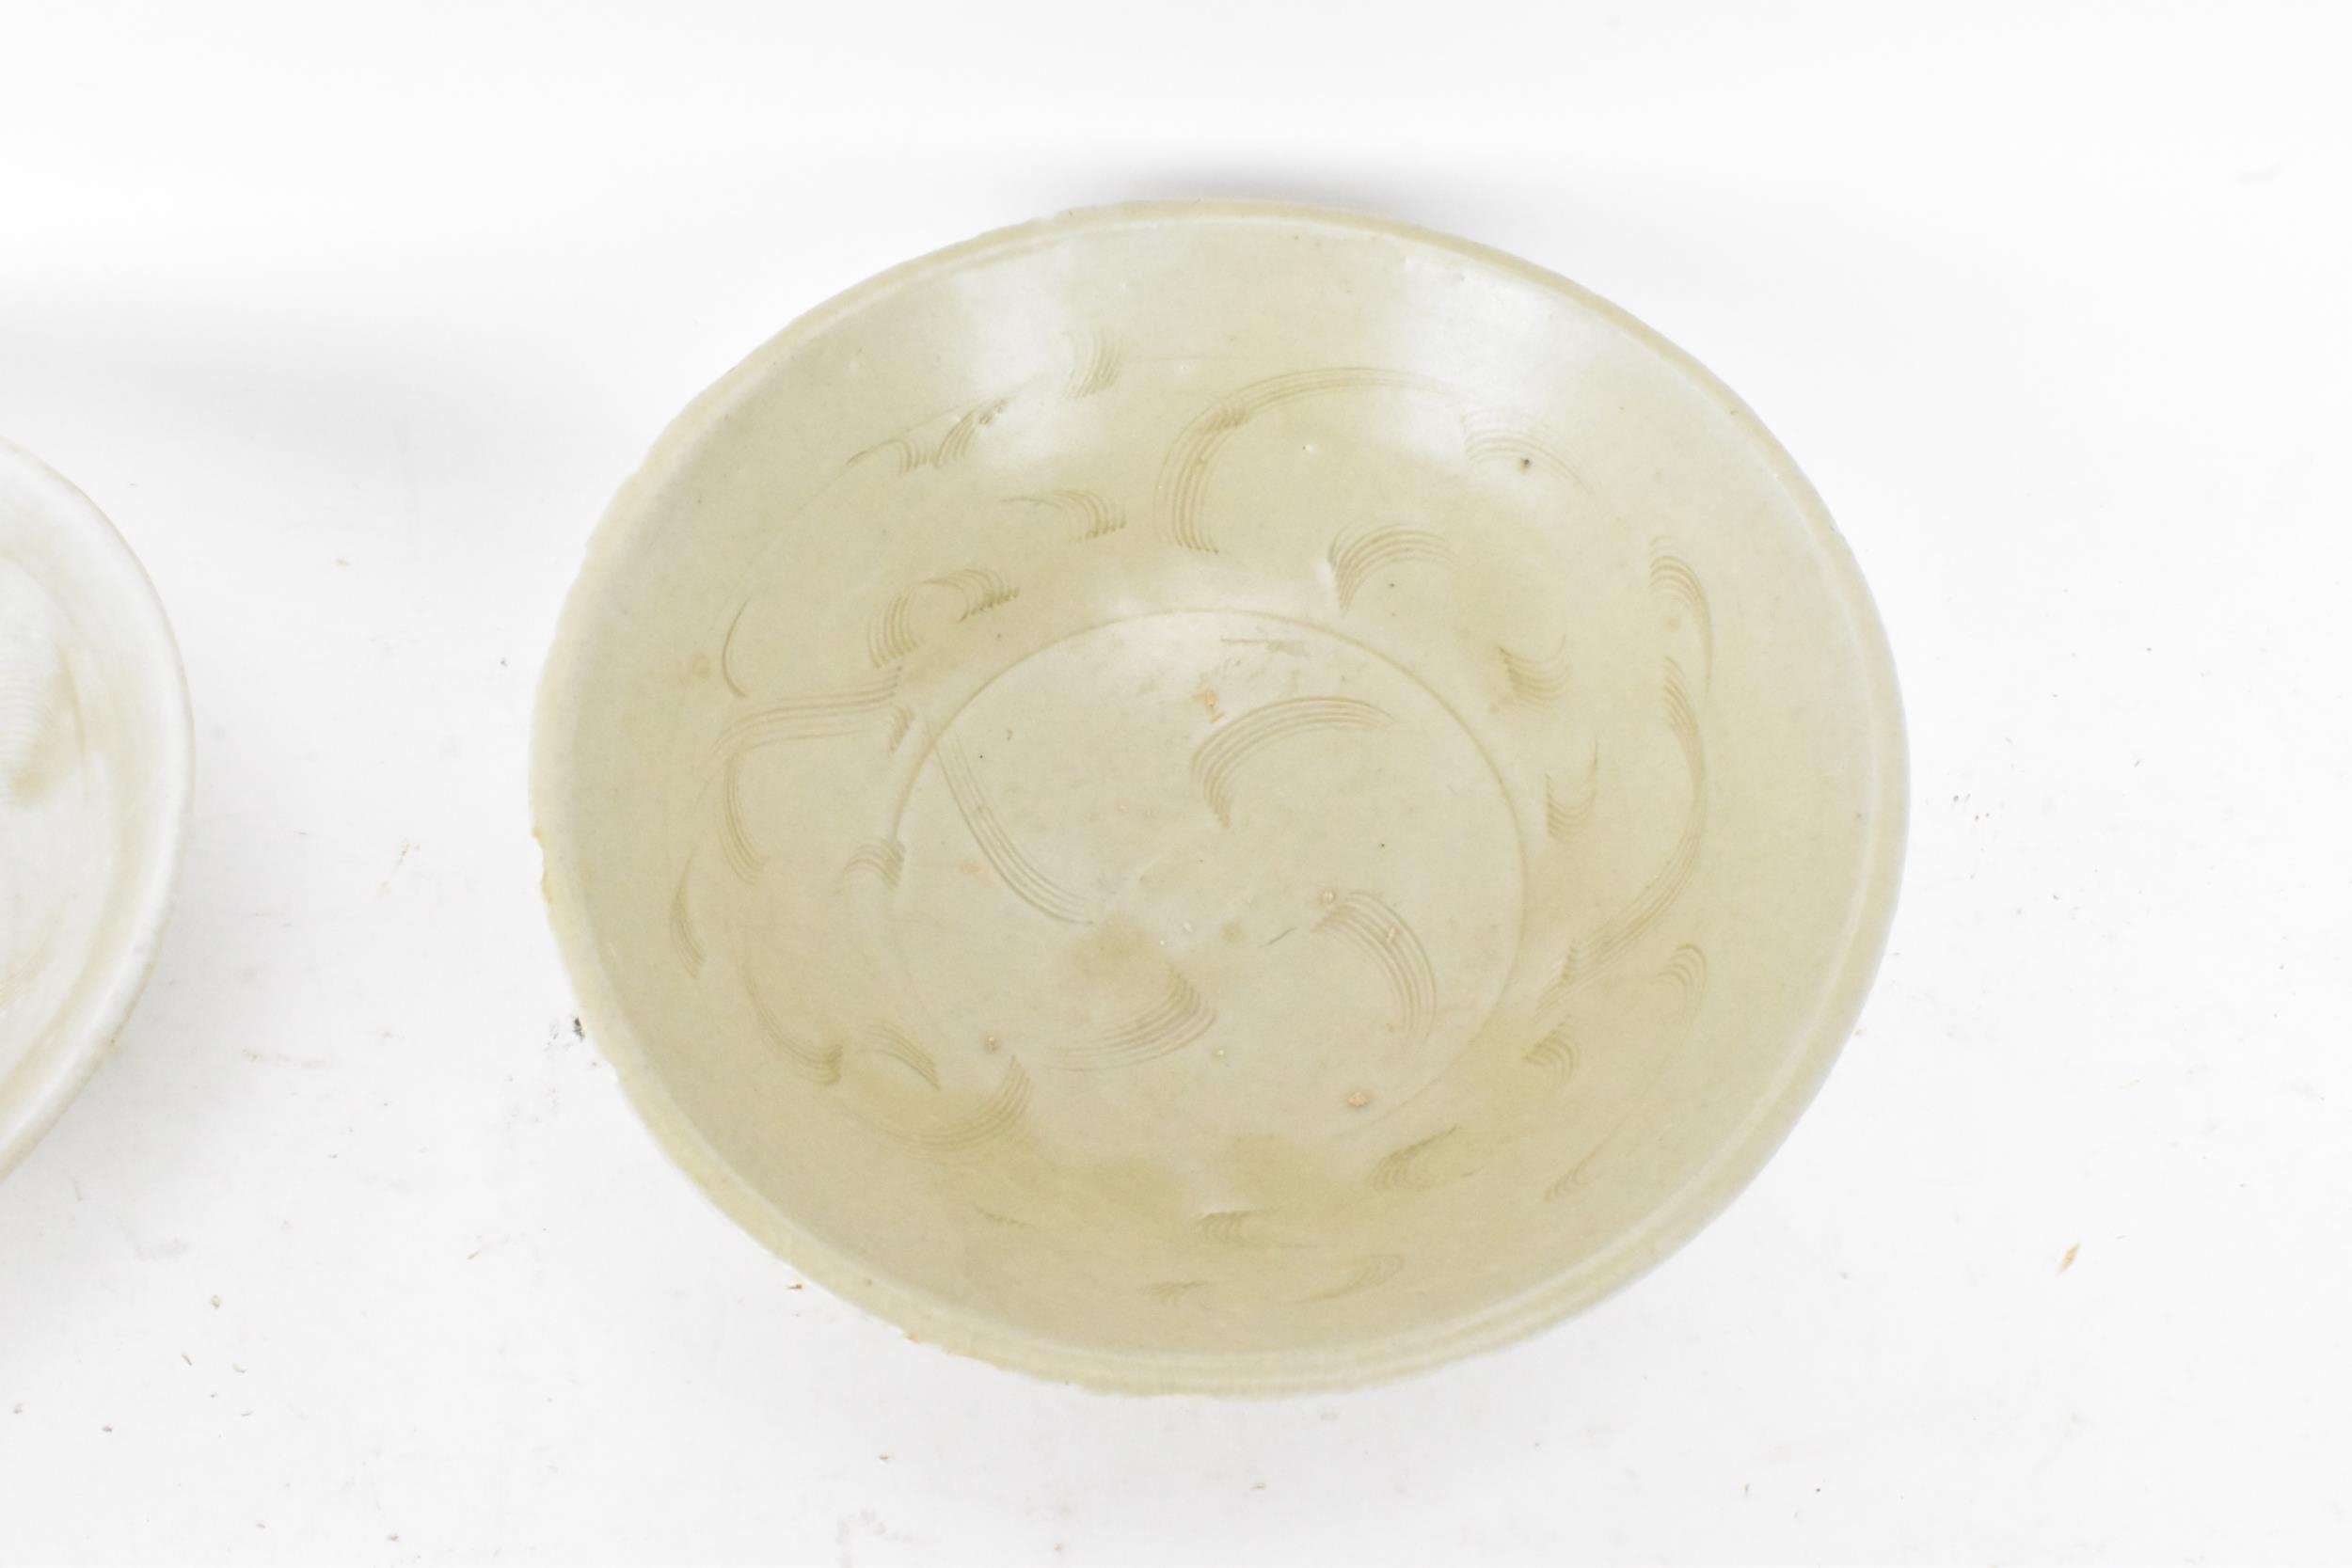 Two Chinese Song dynasty (960-1279) celadon glazed bowls, from a shipwreck in the South China - Image 2 of 5